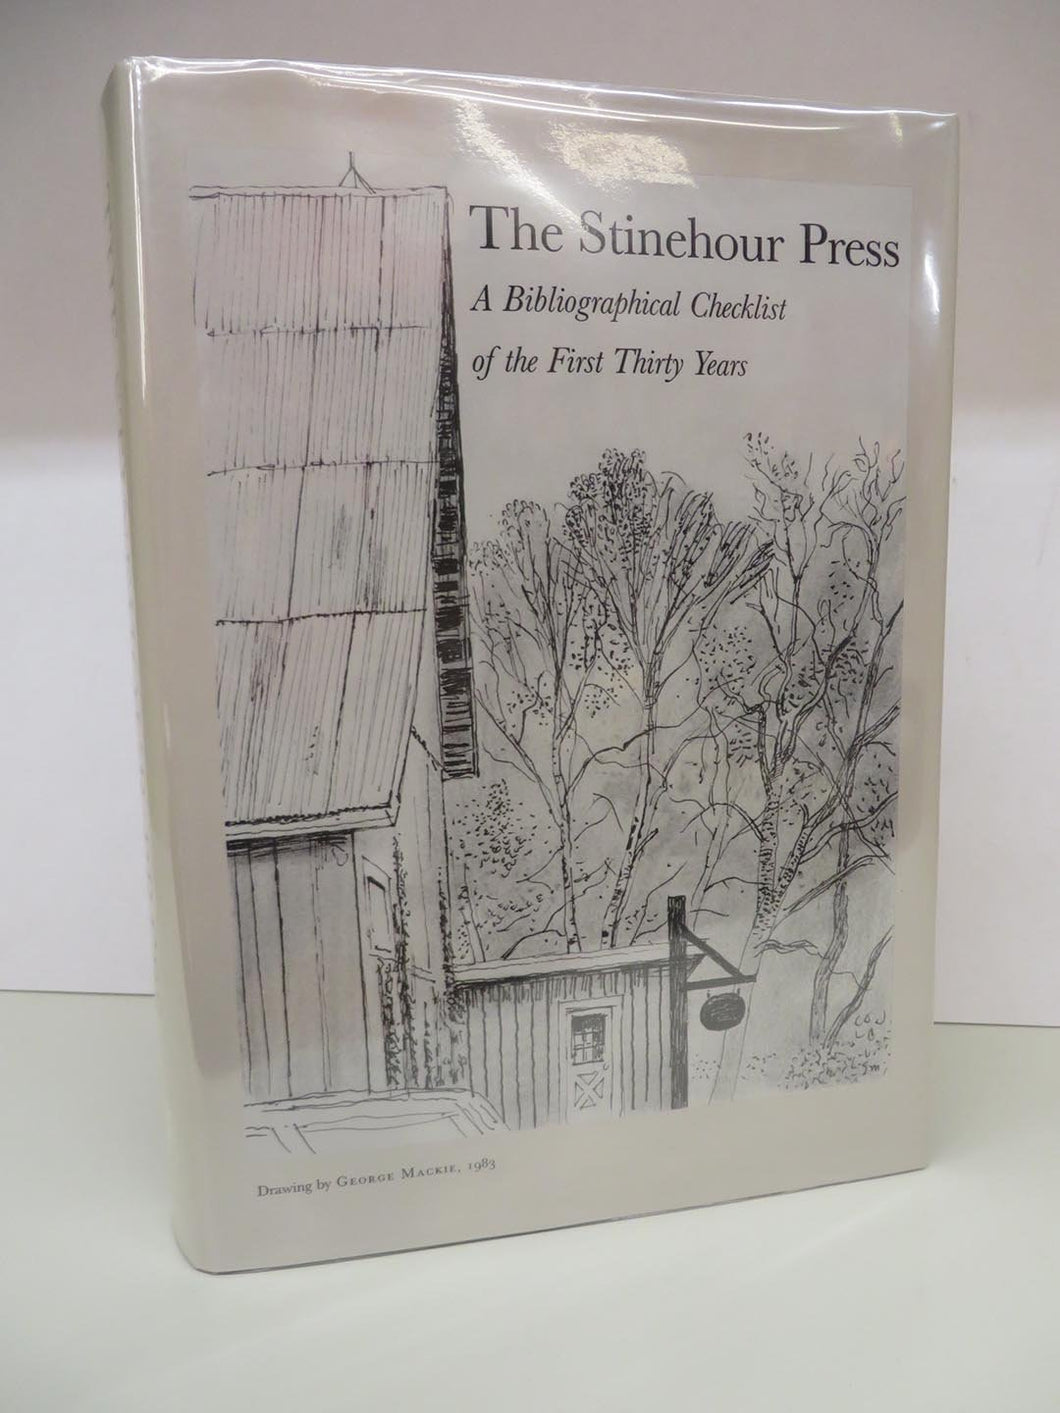 The Stinehour Press: A Bibliographical Checklist of the First Thirty Years